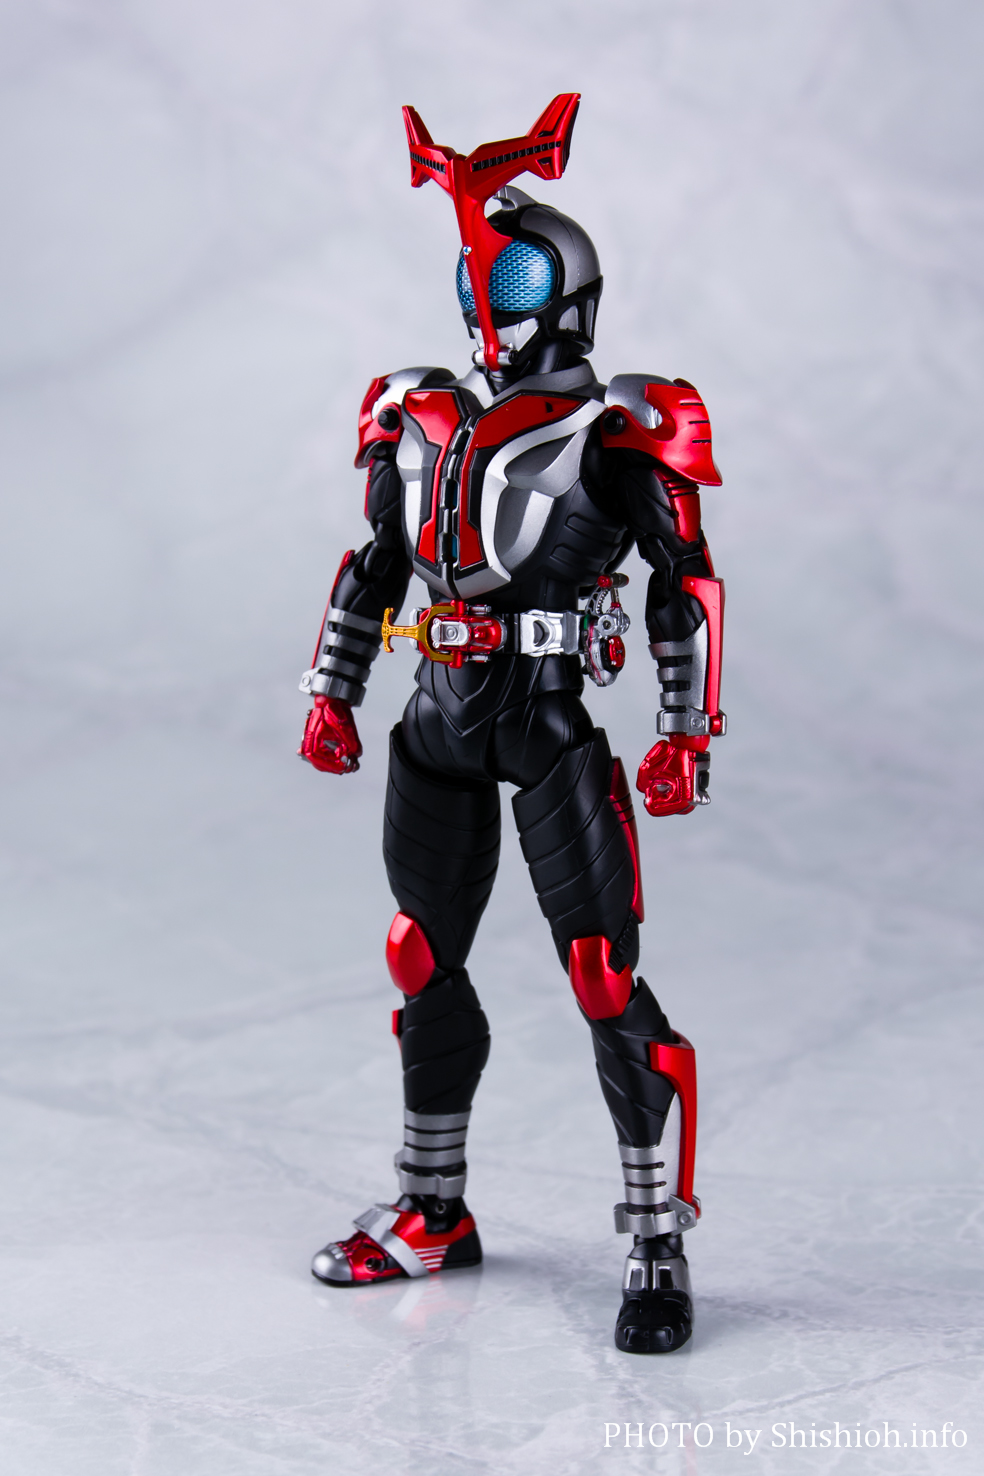 S.H.Figuarts 真骨彫製法 仮面ライダーカブト ハイパーフォーム 新品-